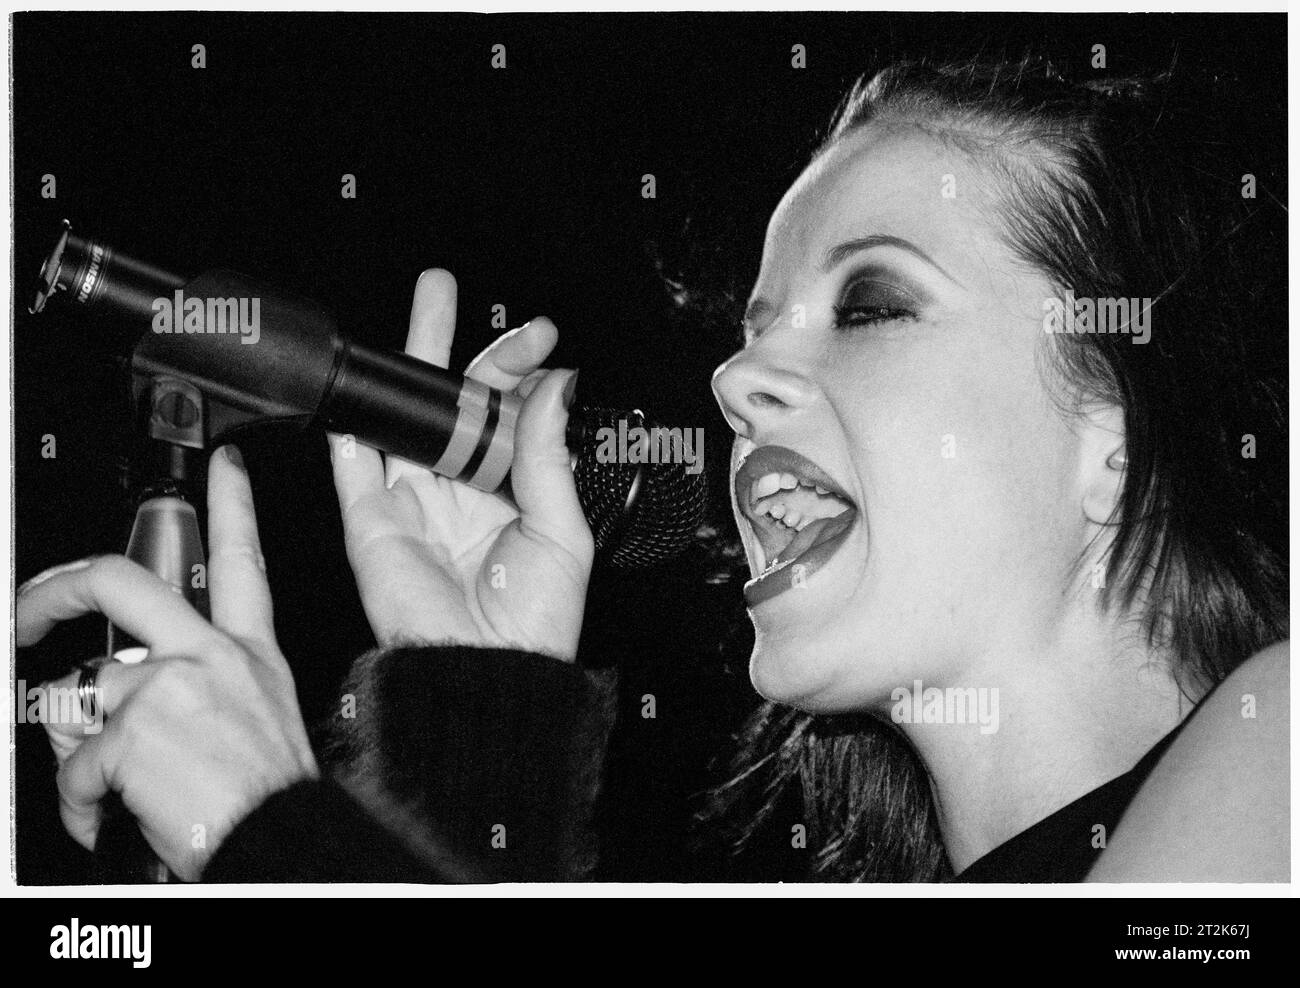 SHIRLEY MANSON, GARBAGE, 1998: Shirley Manson of Garbage playing live at Newport Centre in Newport, Wales, UK on 6 June 1998. The band were touring their Version 2.0 album. Photograph: Rob Watkins Stock Photo